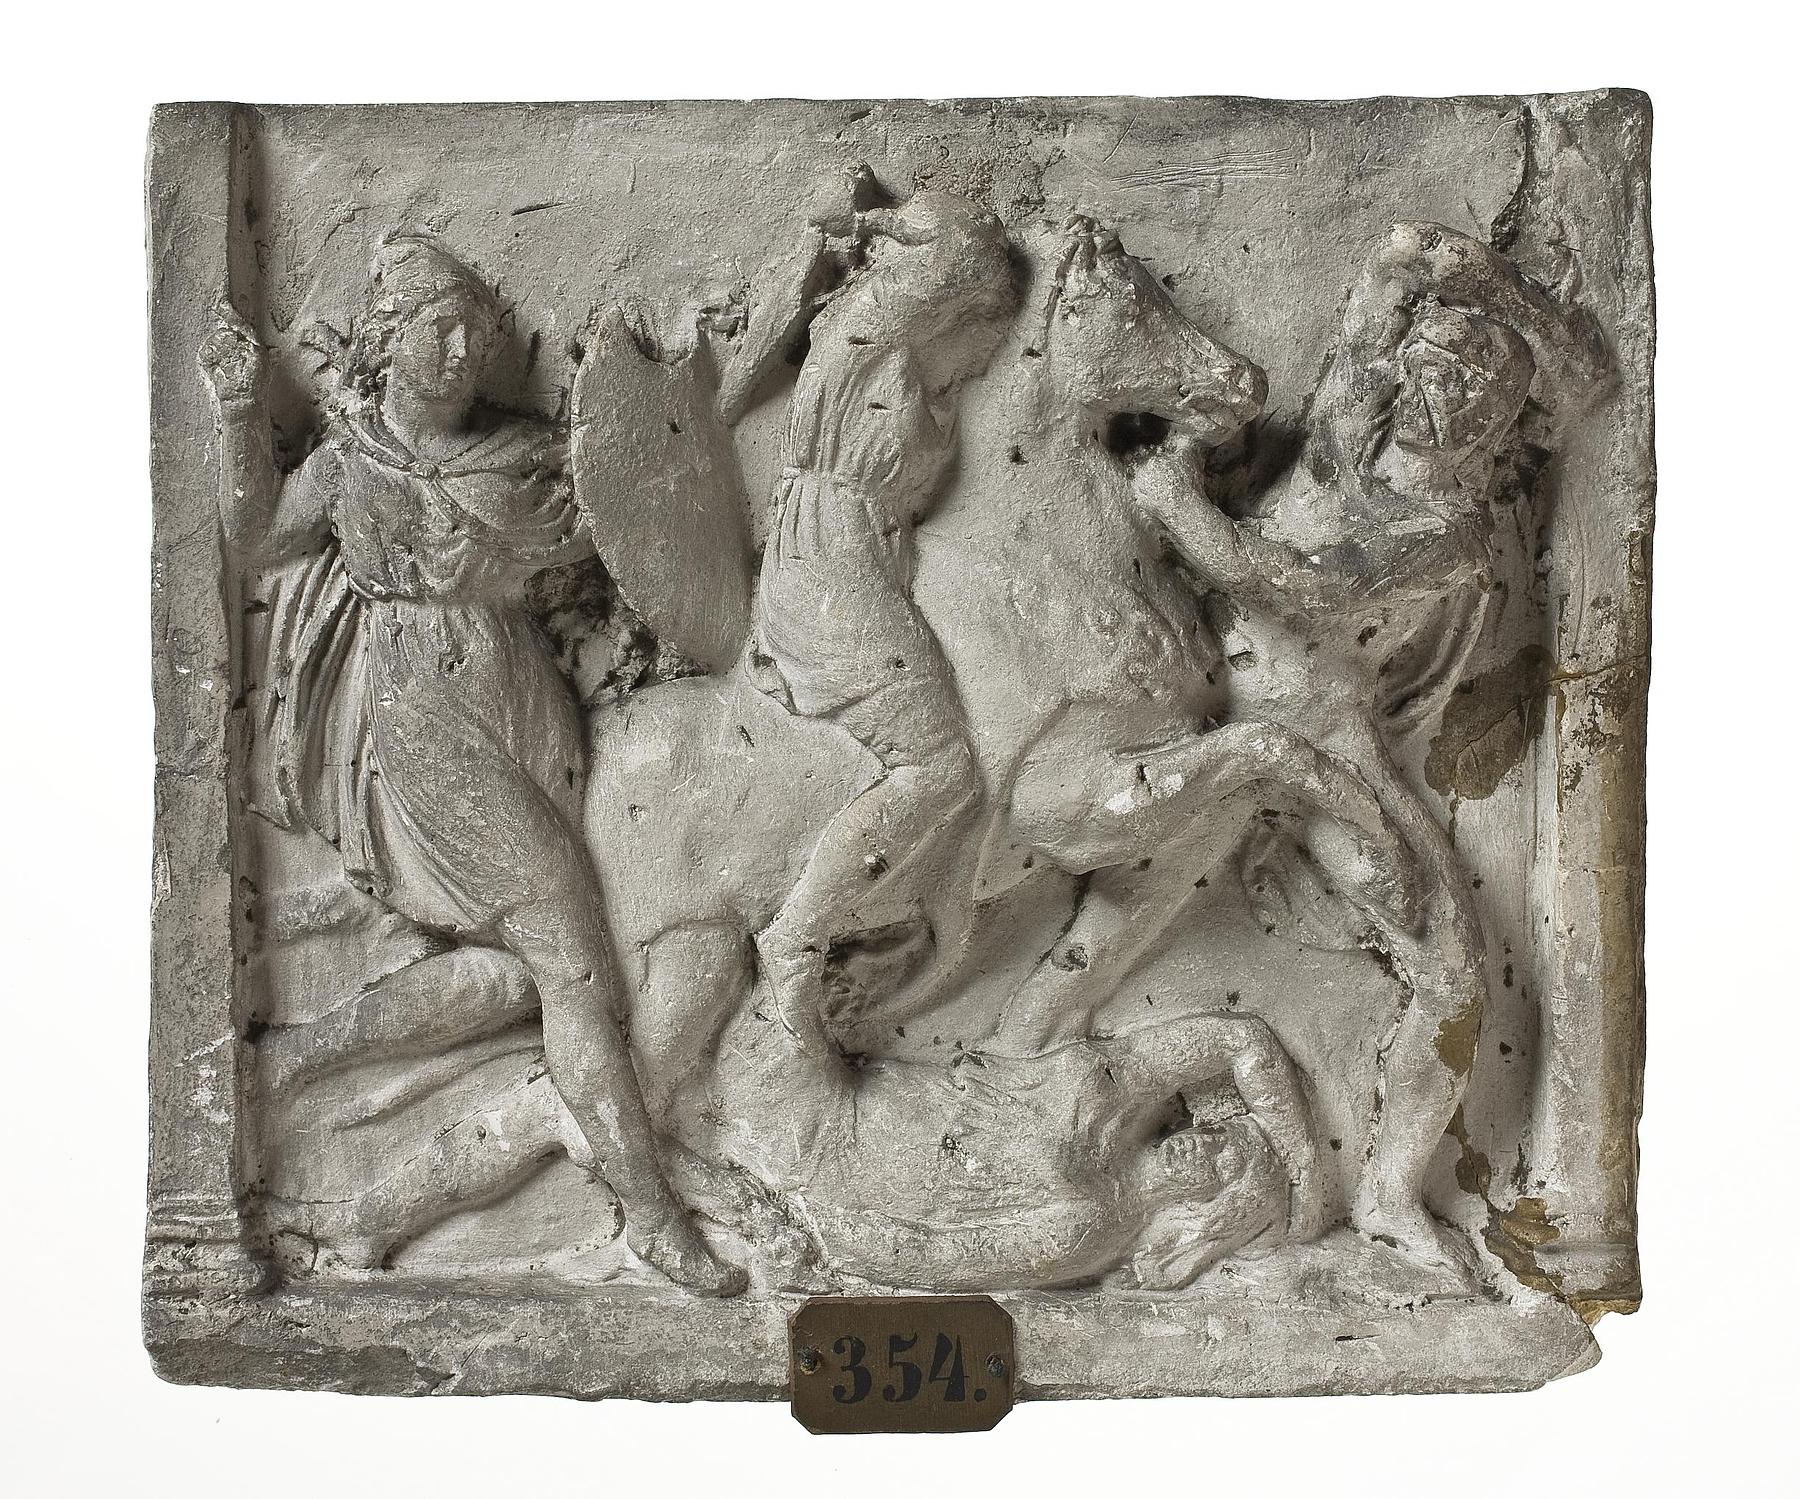 Hercules and amazons, L354